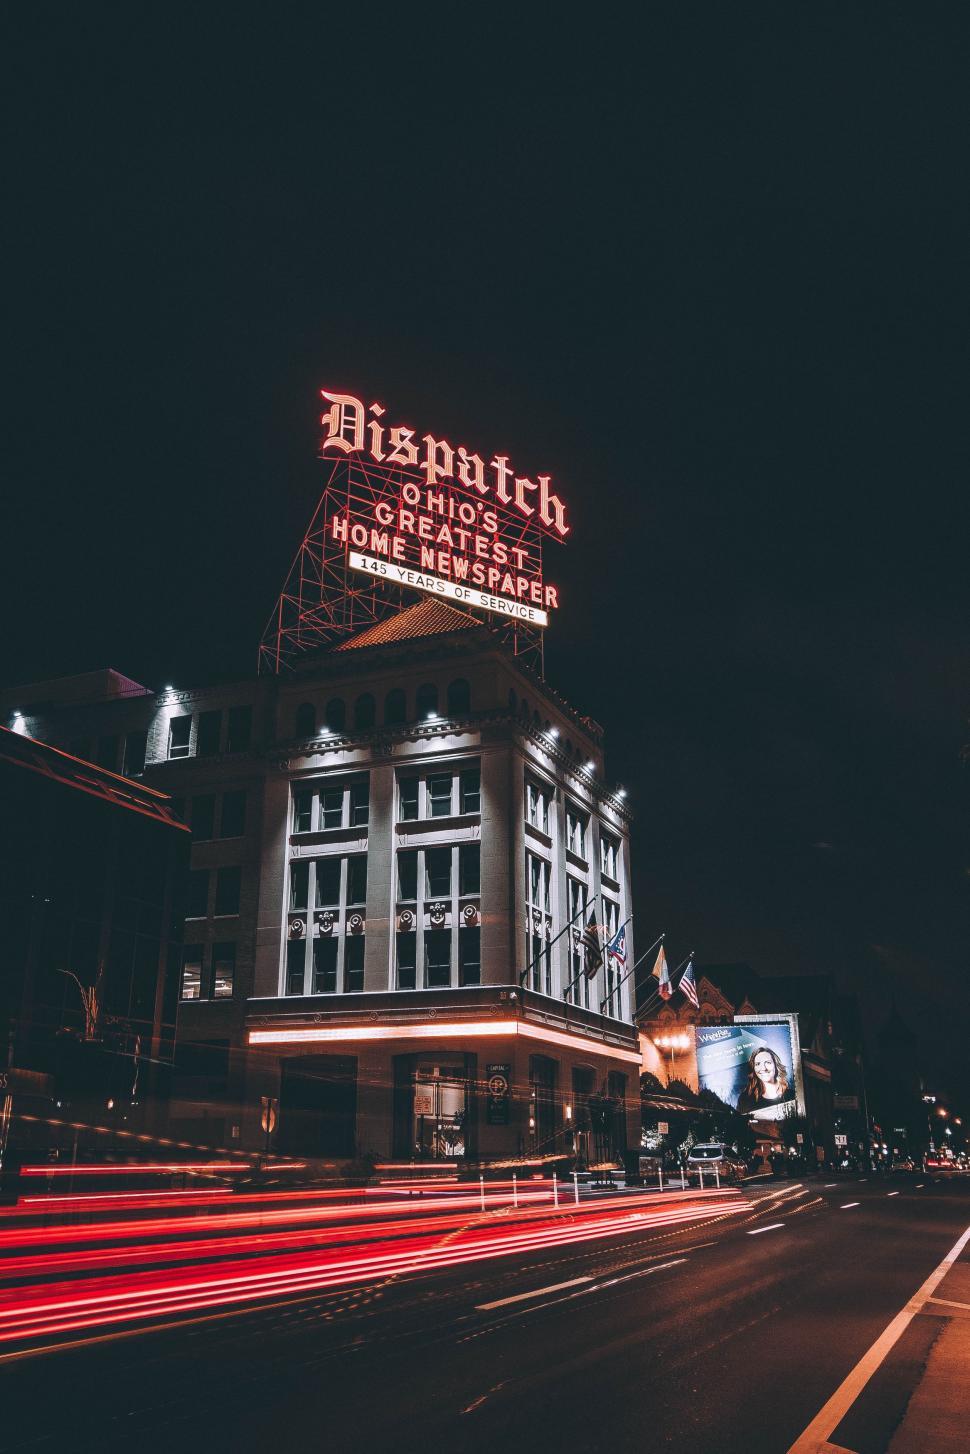 Free Image of Large Building With Neon Sign 